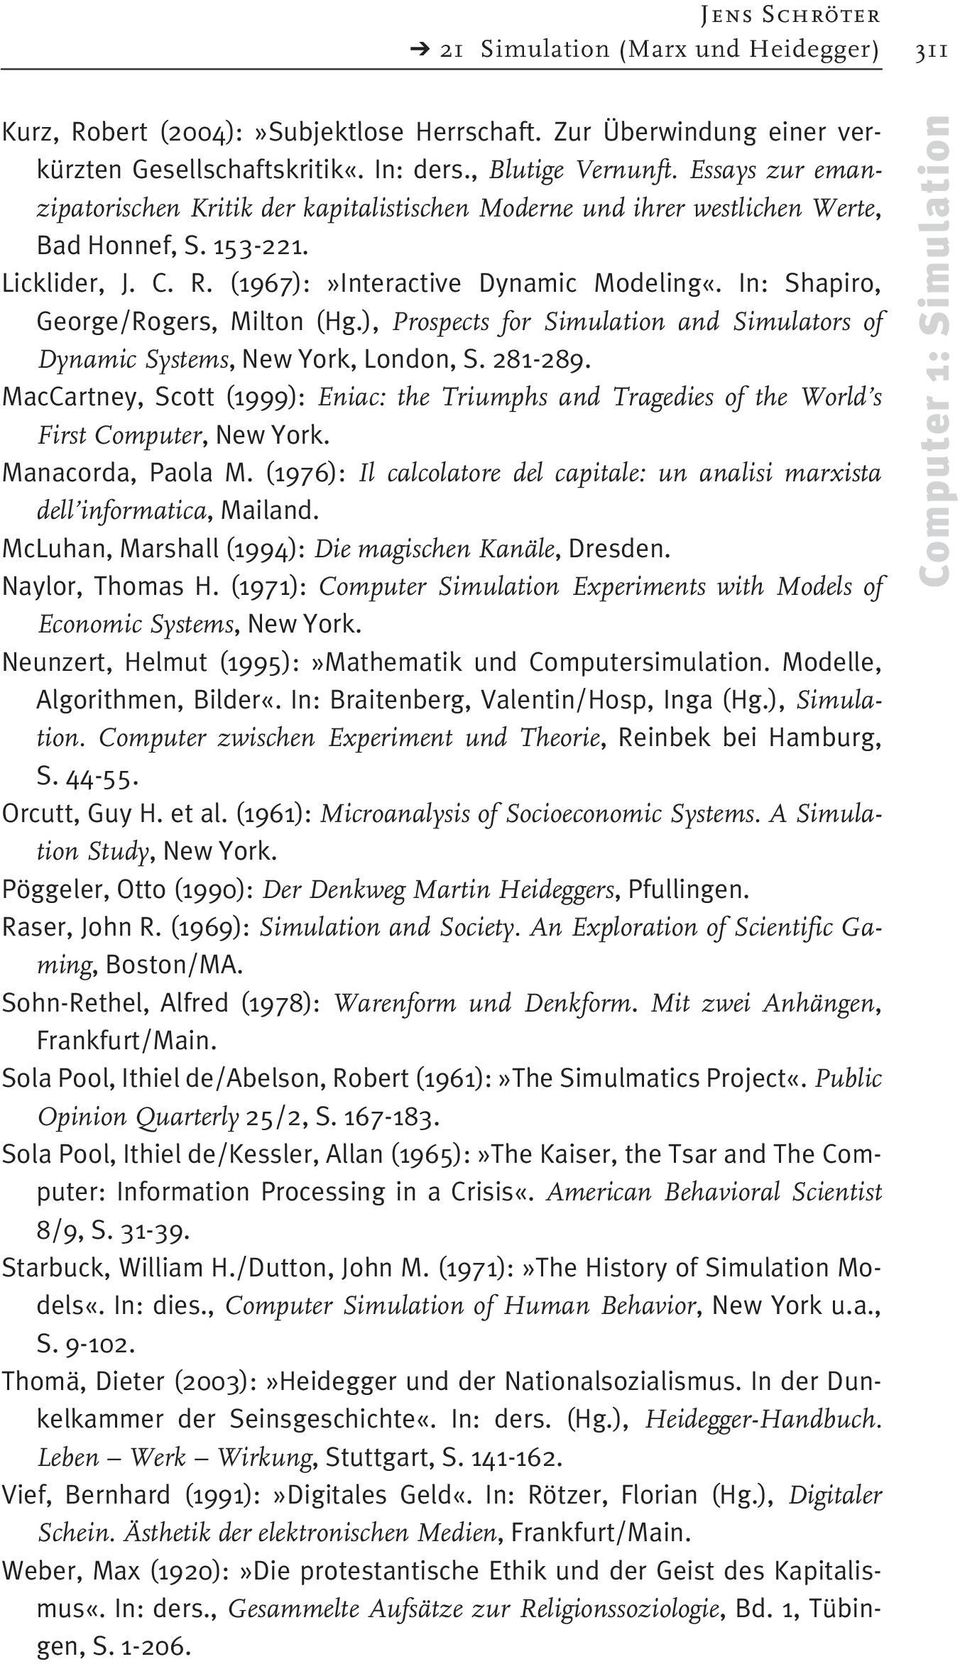 In: Shapiro, George/Rogers, Milton (Hg.), Prospects for Simulation and Simulators of Dynamic Systems, New York, London, S. 281-289.